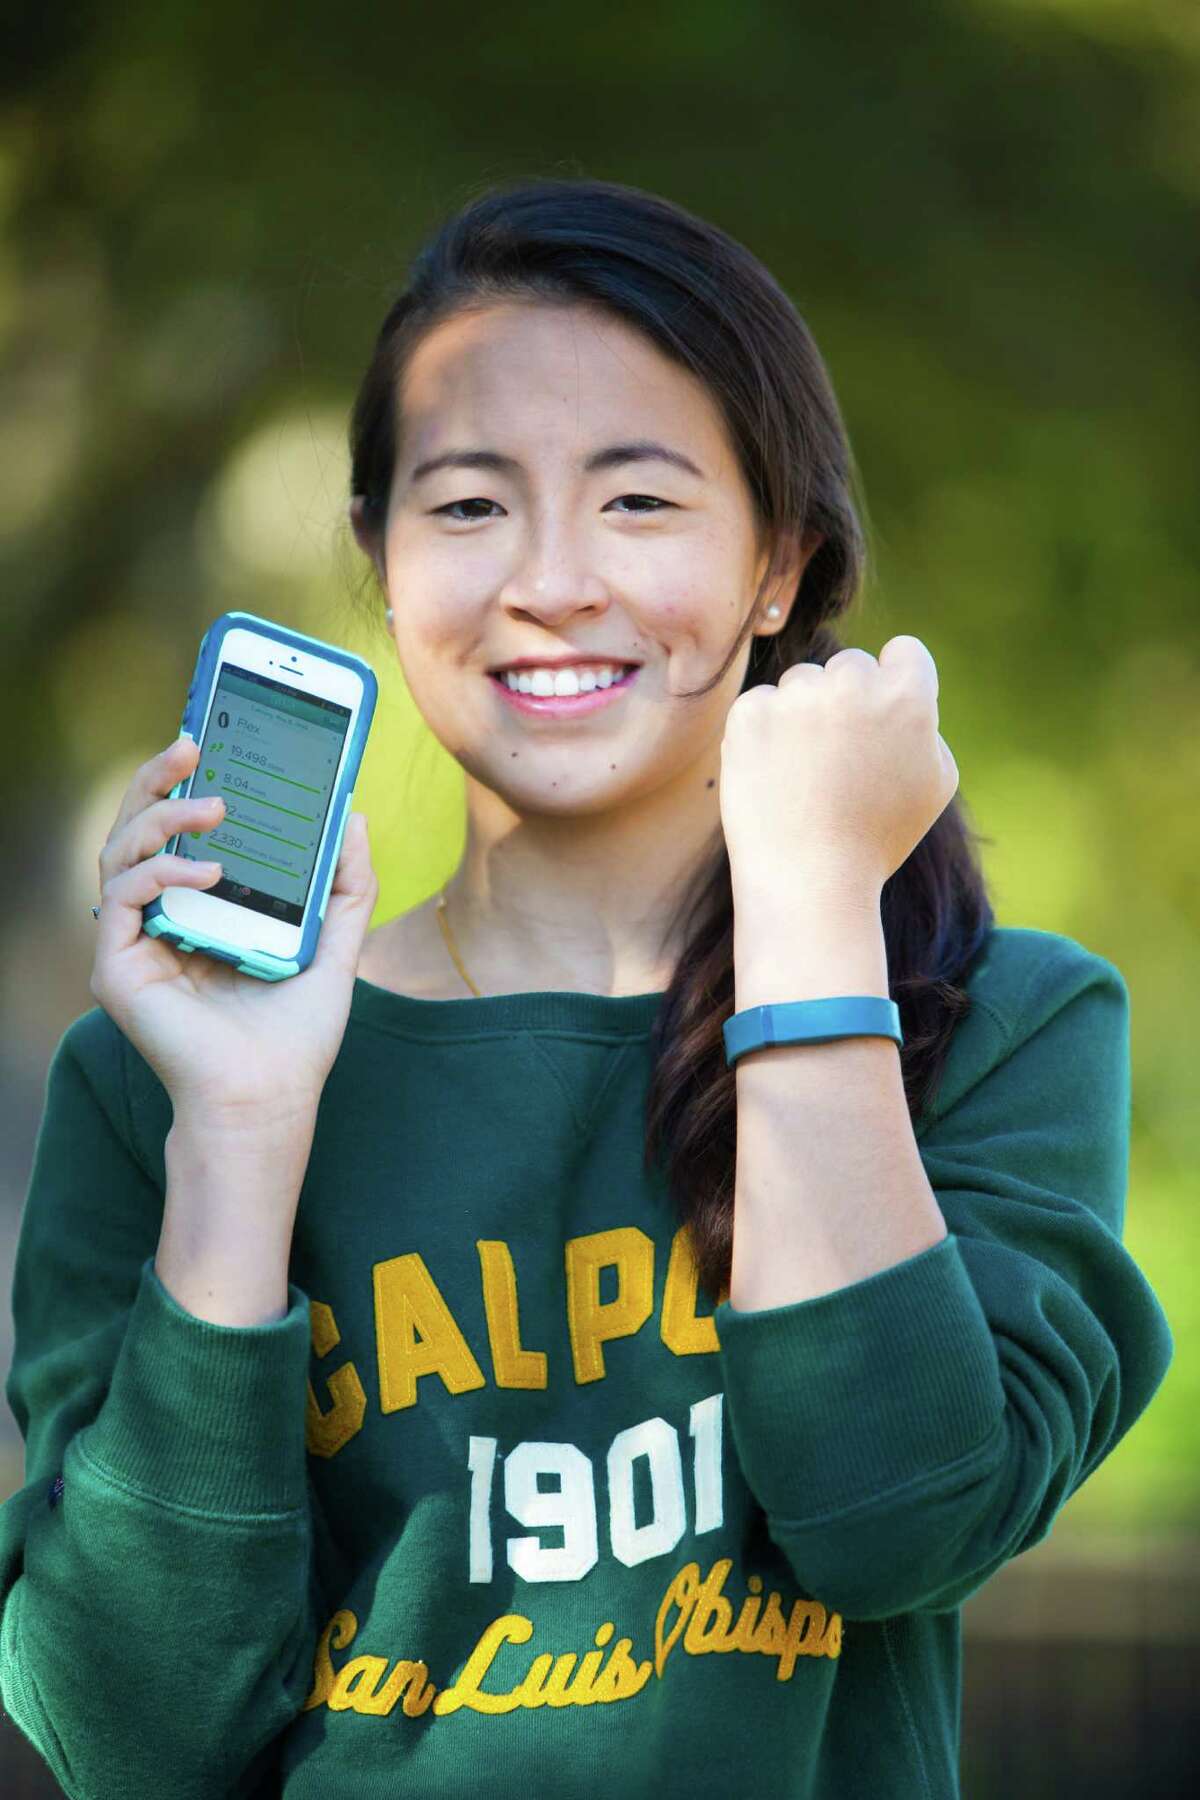 Allison Ying, 20, uses a Fitbit wristband to keep track of her daily steps, sleep and other fitness info. In fact, because of her influence, now her whole family uses the Fitbit. Friday, Nov. 29, 2013, in Houston. ( Marie D. De Jesus / Houston Chronicle )